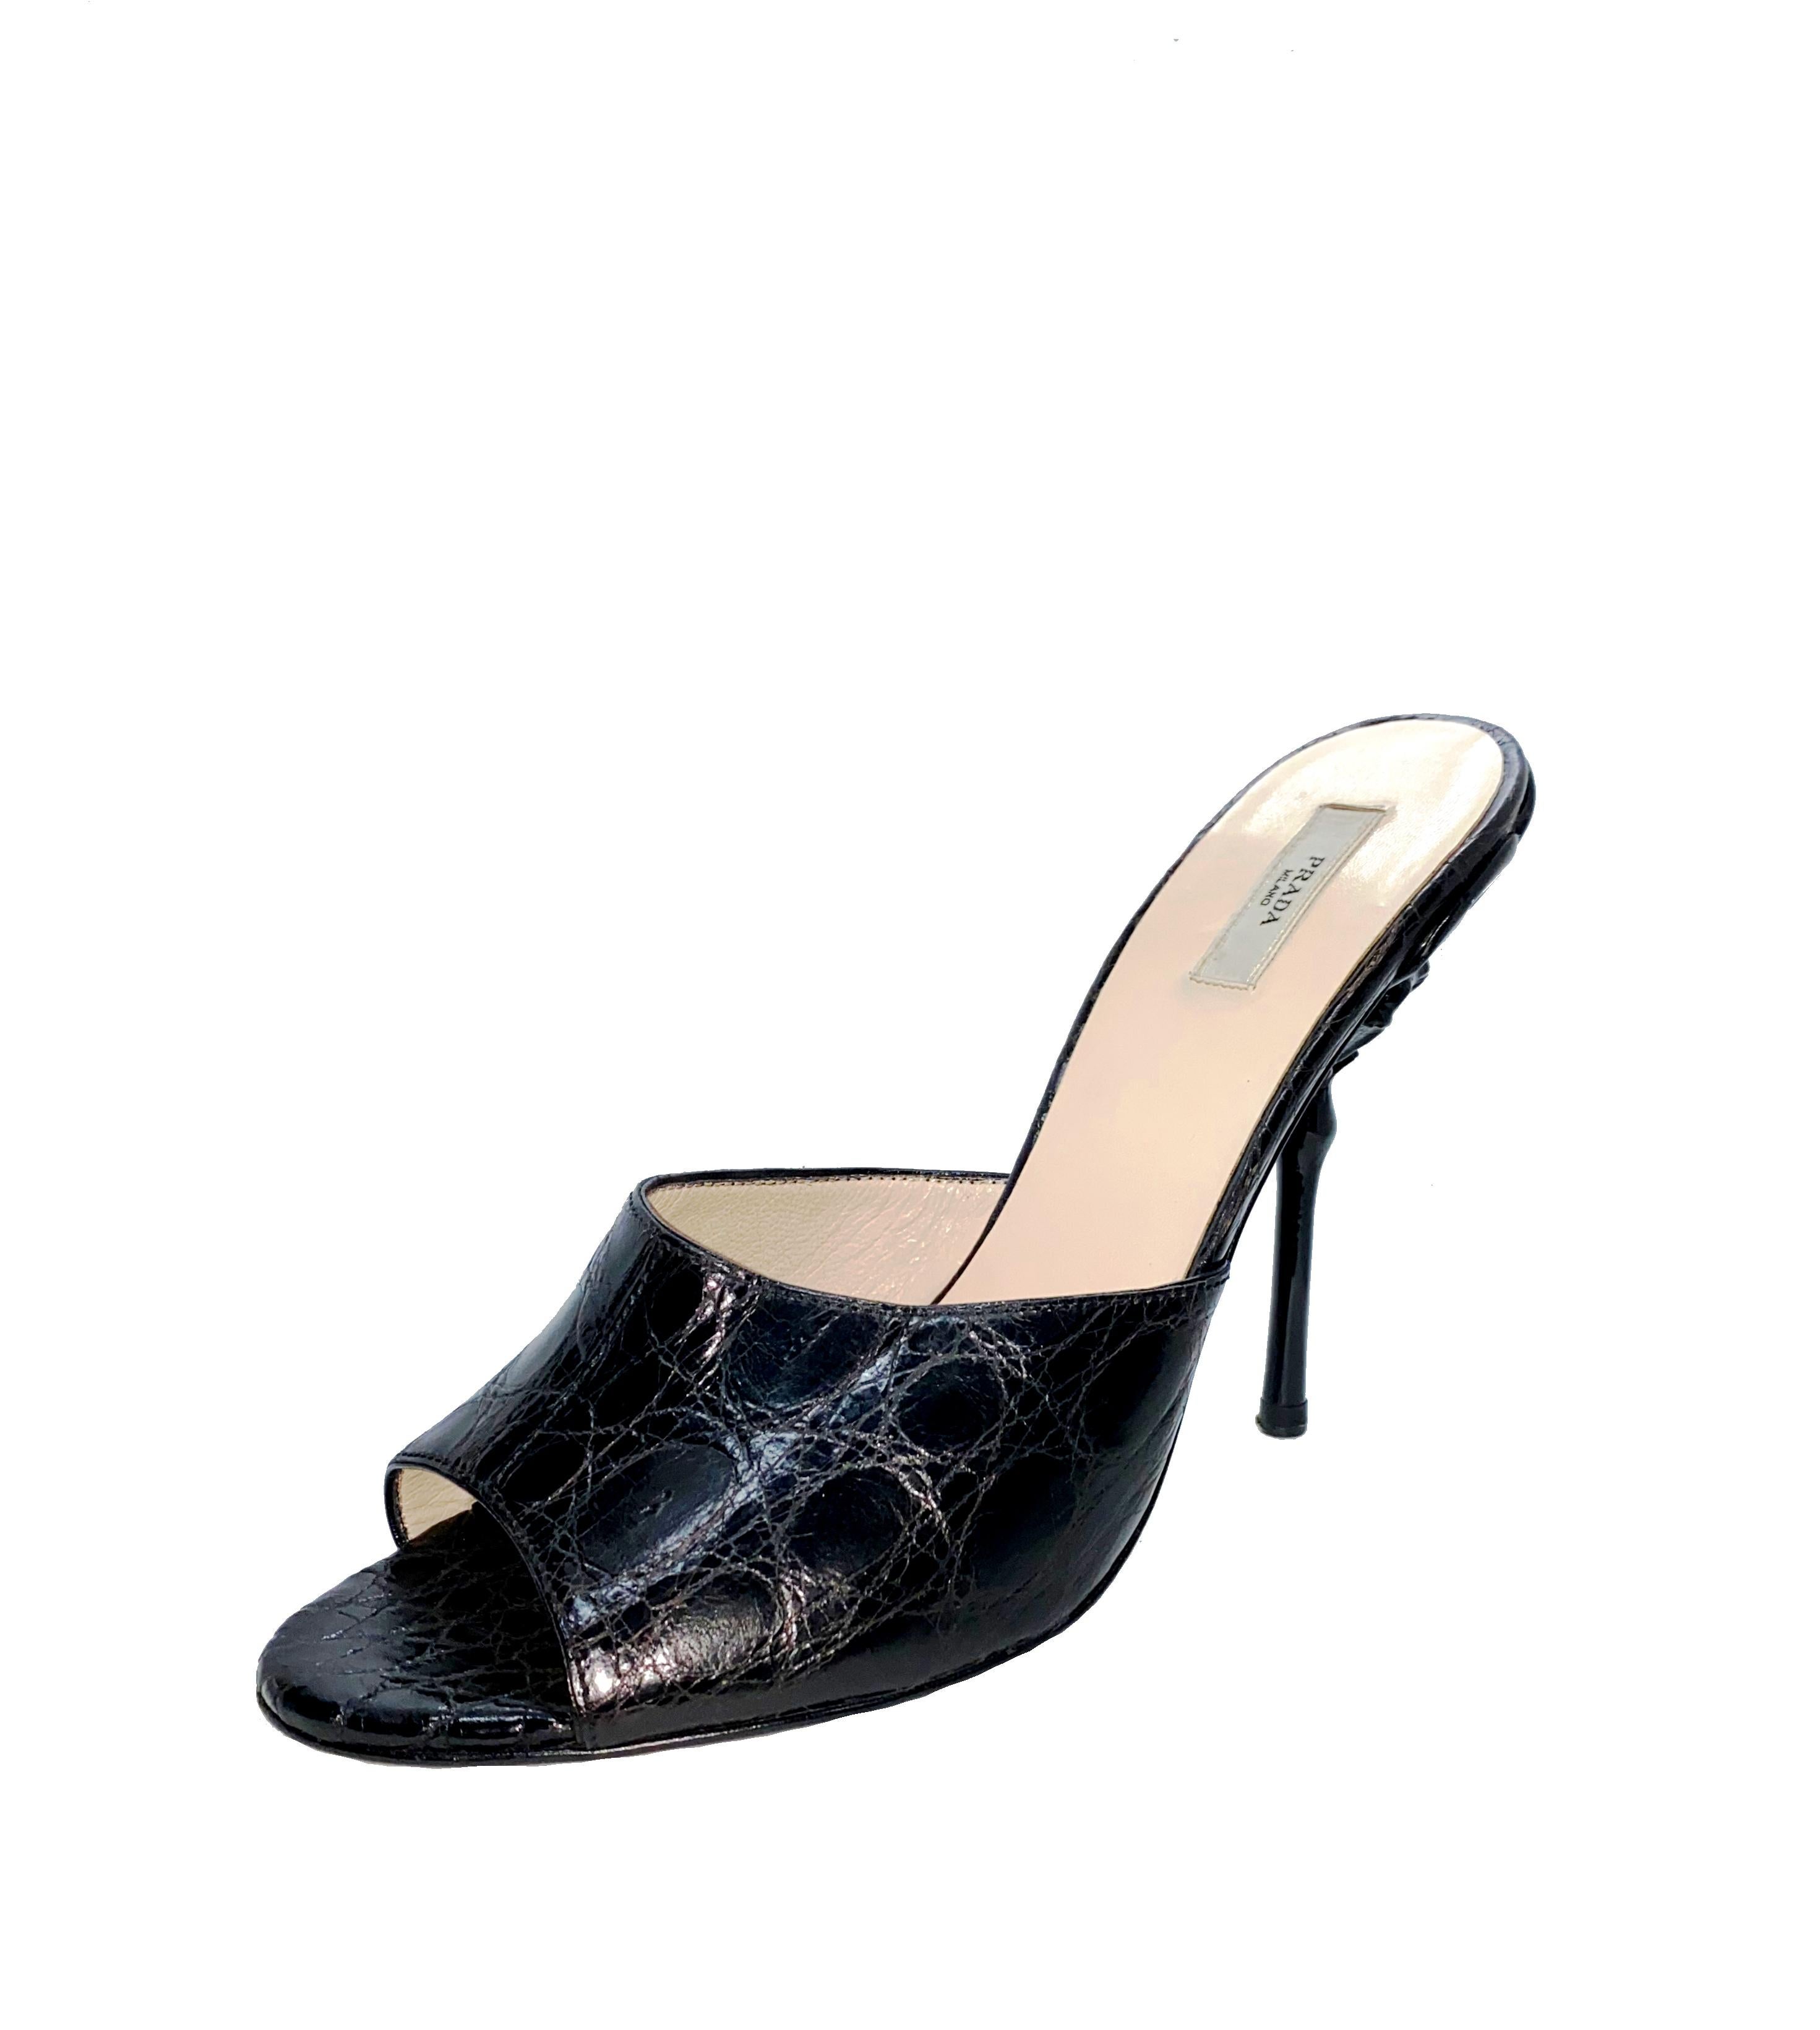 Beautiful Prada High Heel Sandals
Real crocodile skin in black color - no print
From Prada's exotic skin collection
The heel is in the shape of a flower
Made in Italy
Size 38 
Comes with Prada dustbag
Retailed for 2799$
